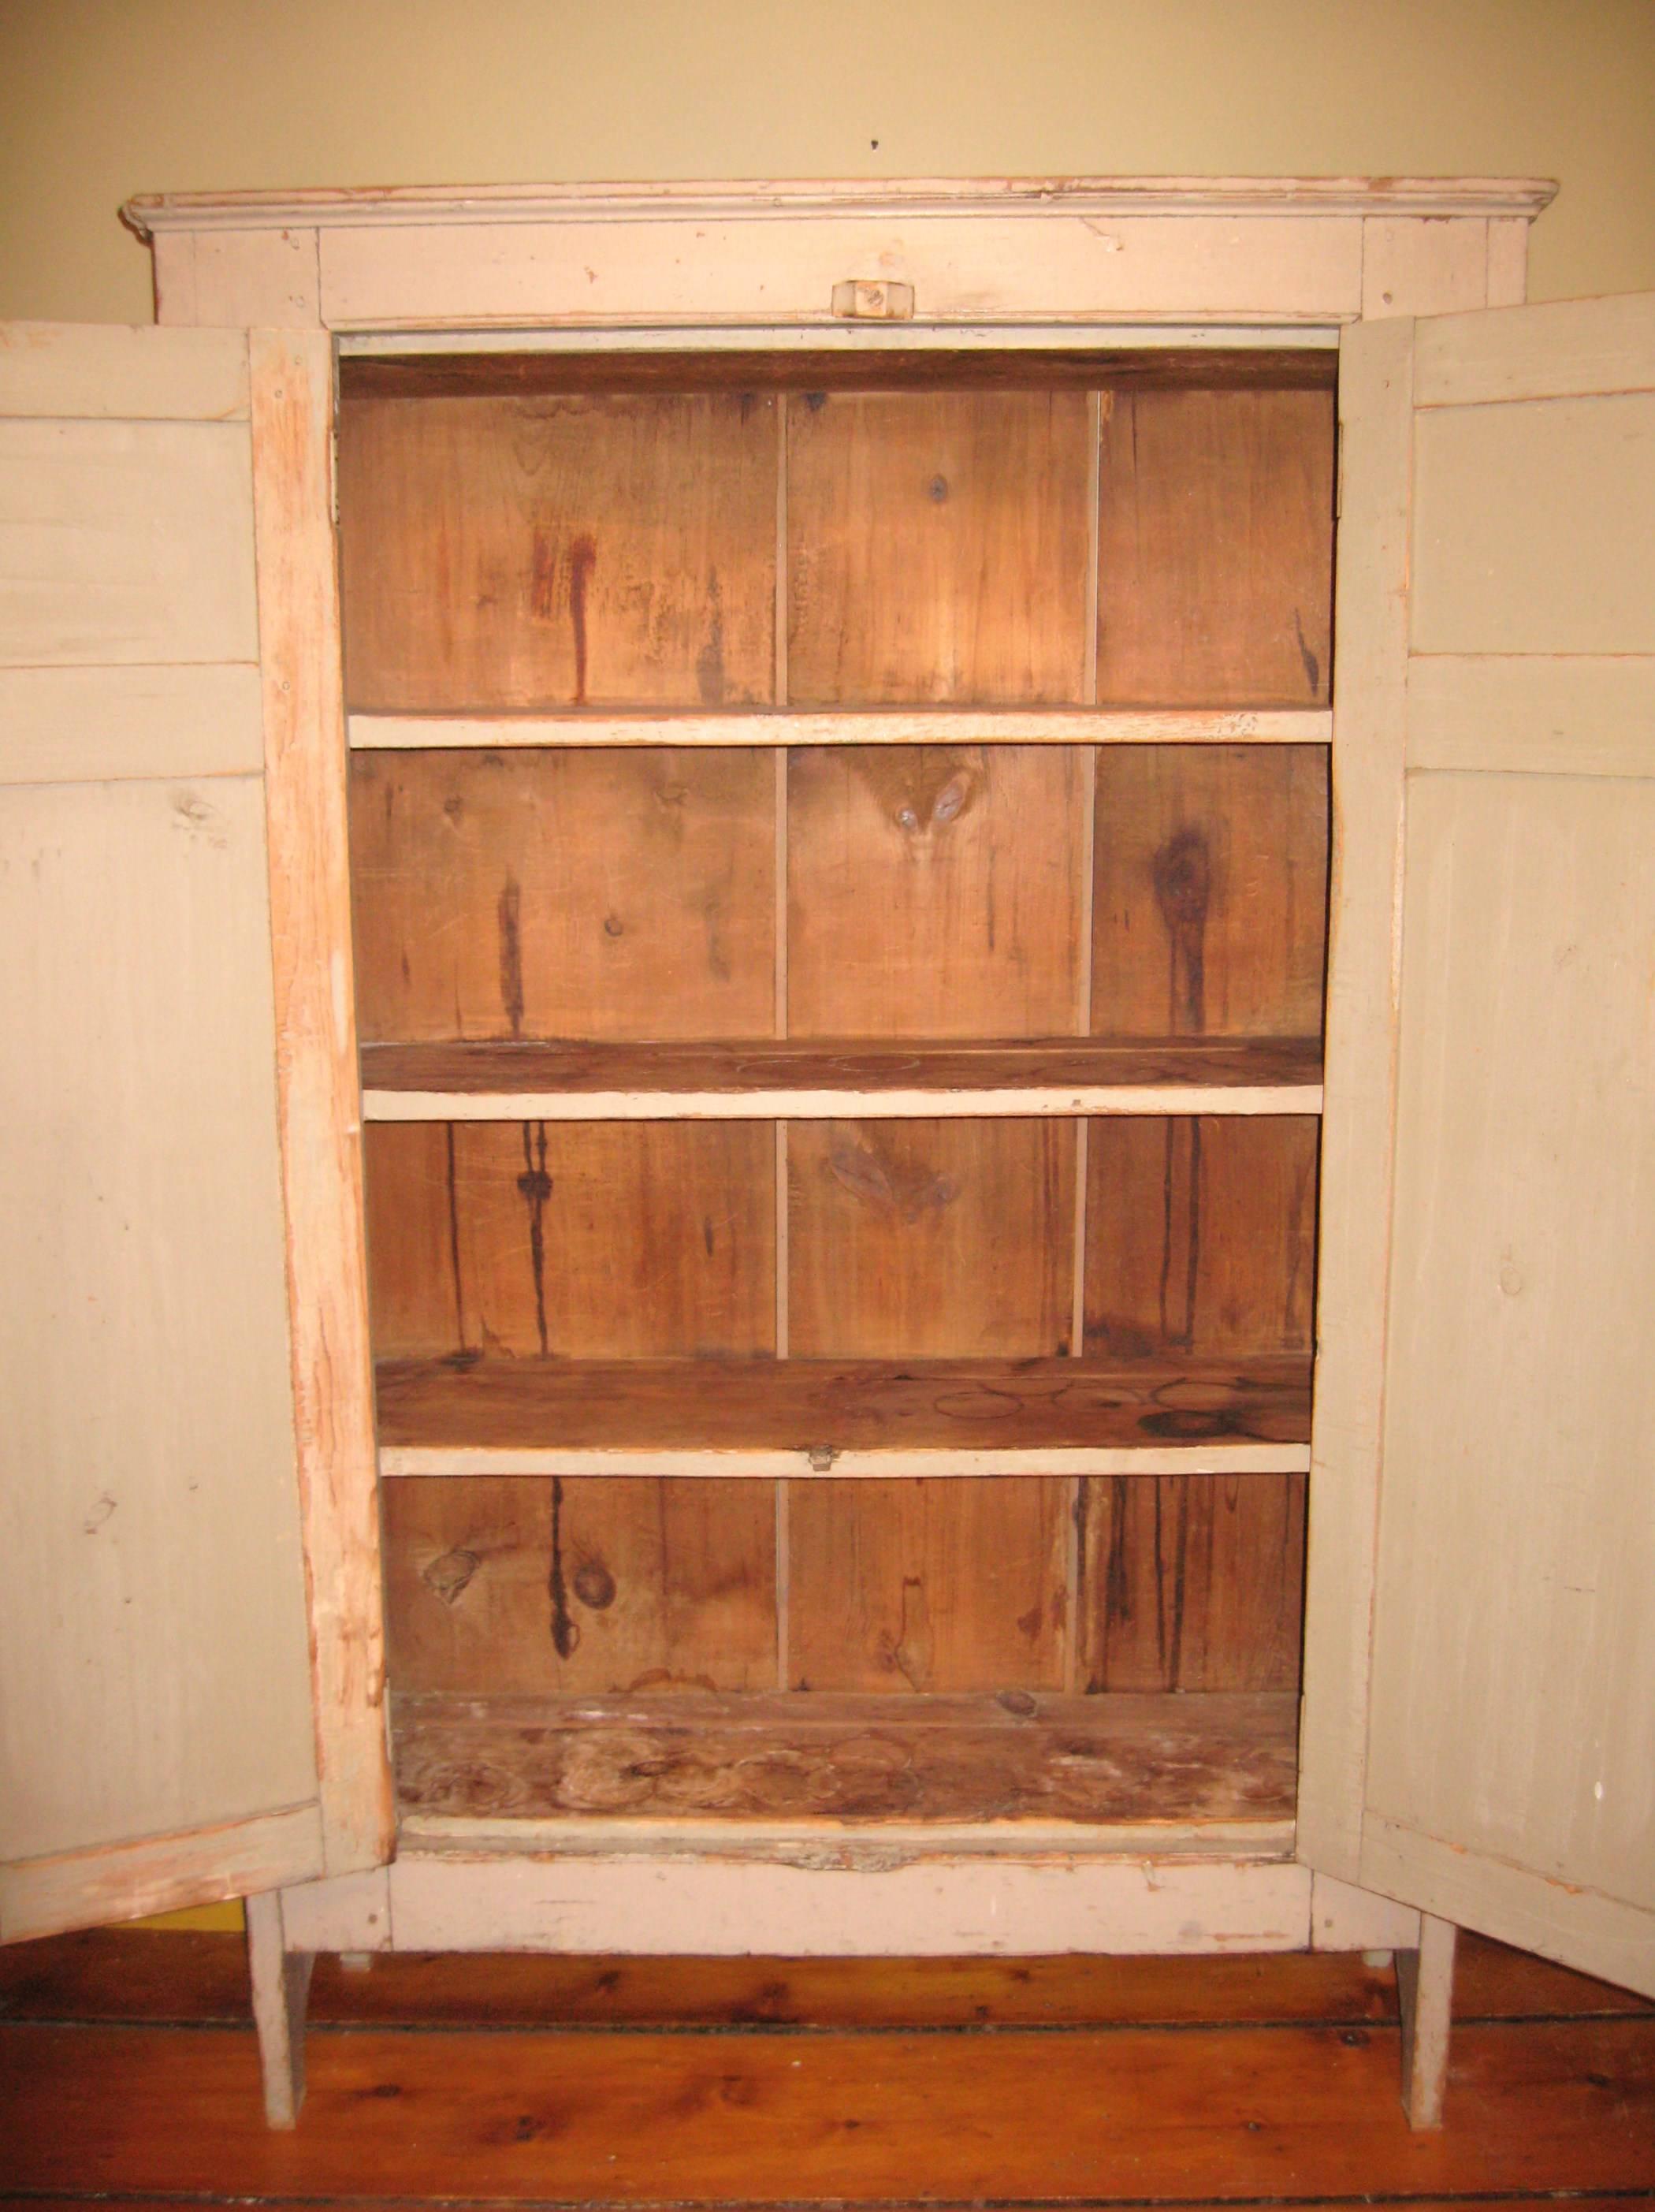 Wonderful early 1800s pine two-door cupboard. Wonderful putty color that will fit in with many color palettes. Pegged construction. Fabulous original distressed look that was not just painted on. Plenty of storage space with four shelves. Original